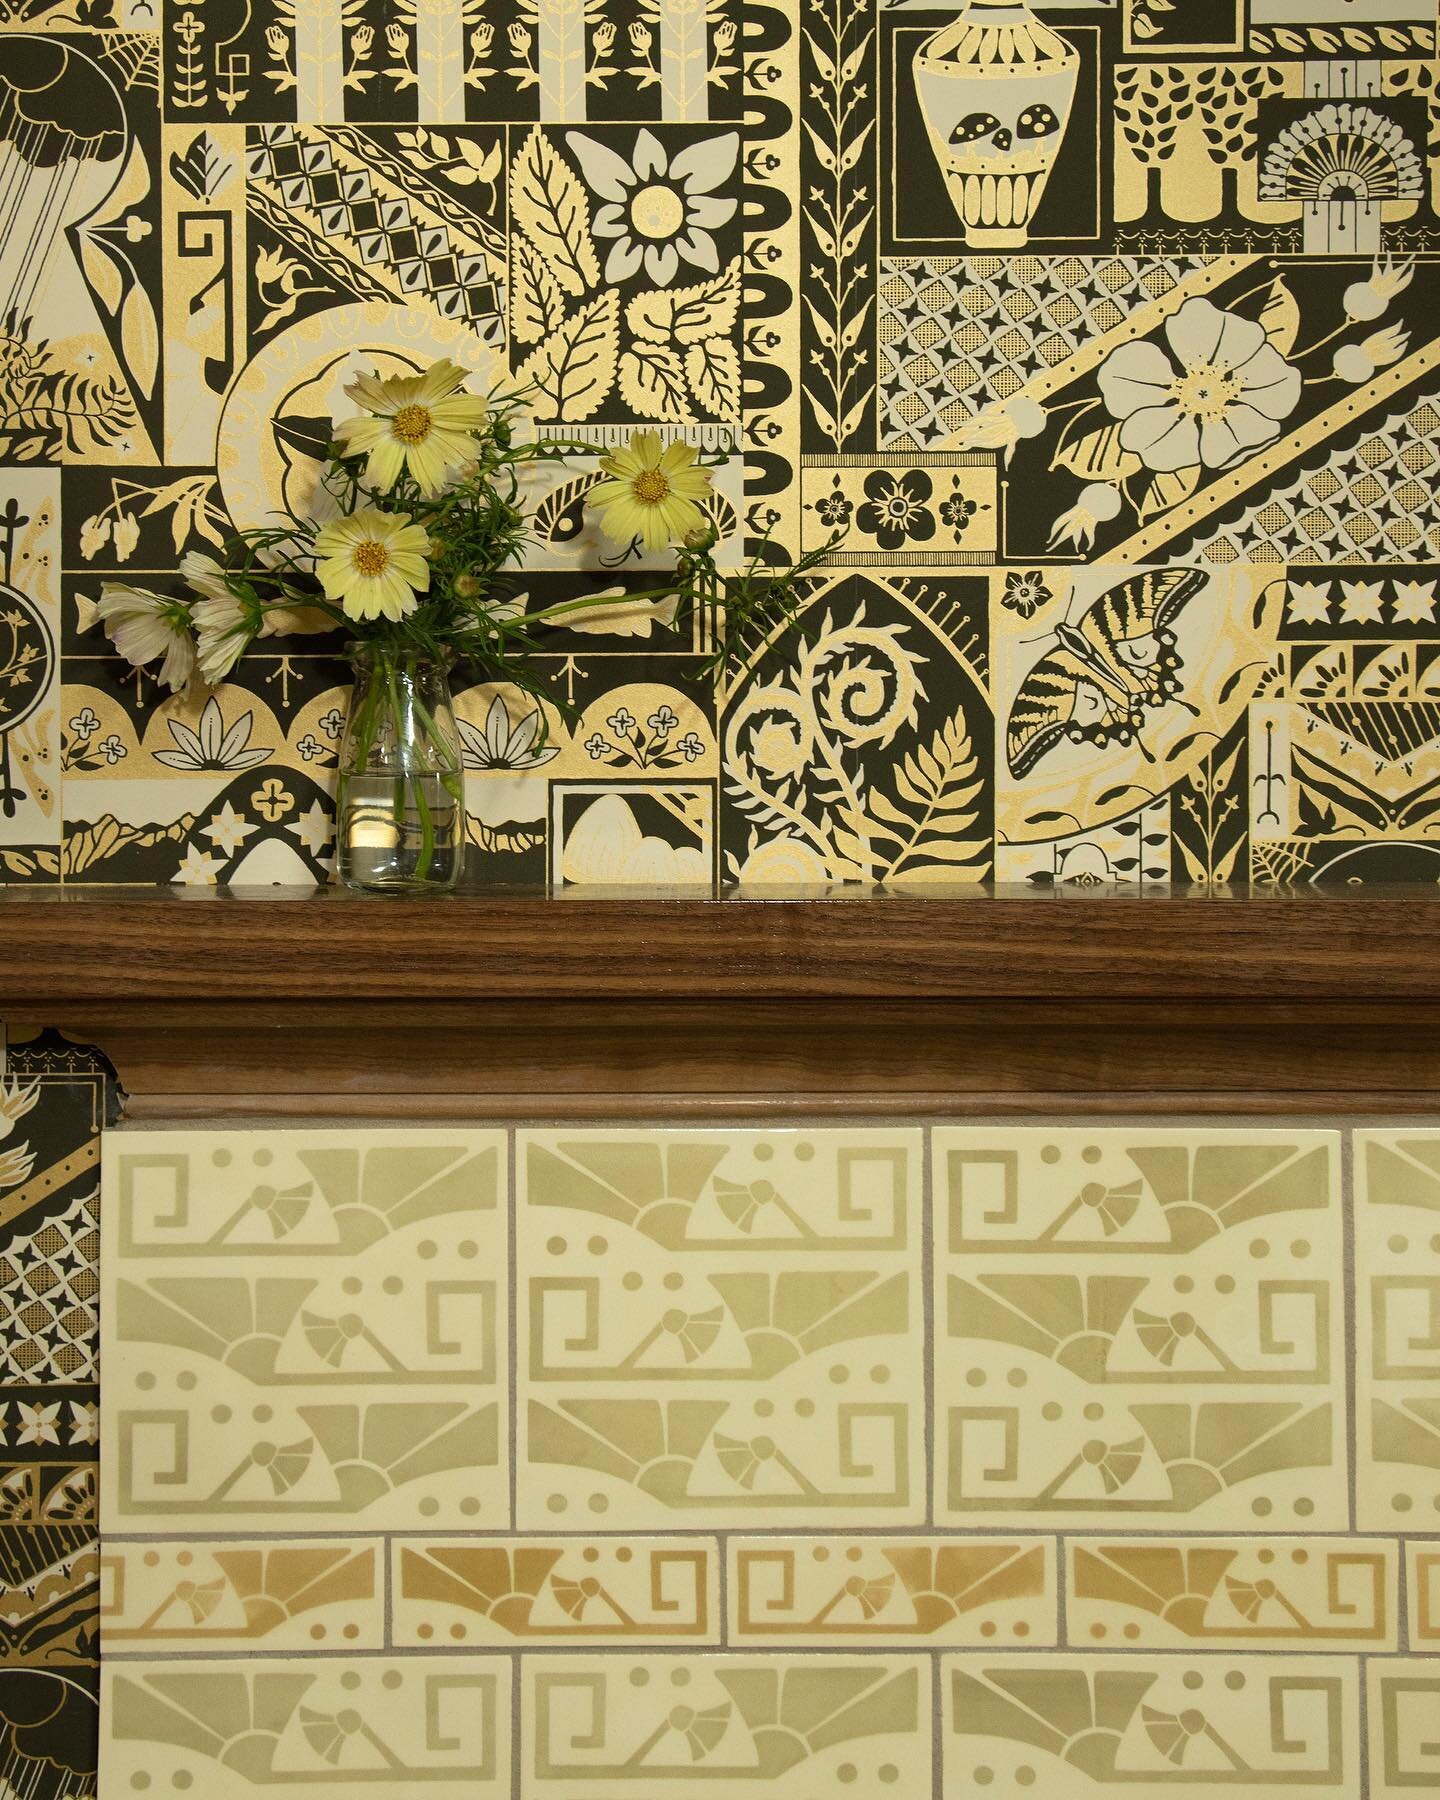 Another one from our tile photoshoot at @tempesttileworks last week! Our Northwestlake wallpaper in Solstice, with corresponding hand screen printed Disco Daisies tiles from our LP x Tempest collaborative line!!!! Maximalism forever!! ✨️✨️ Photo and 